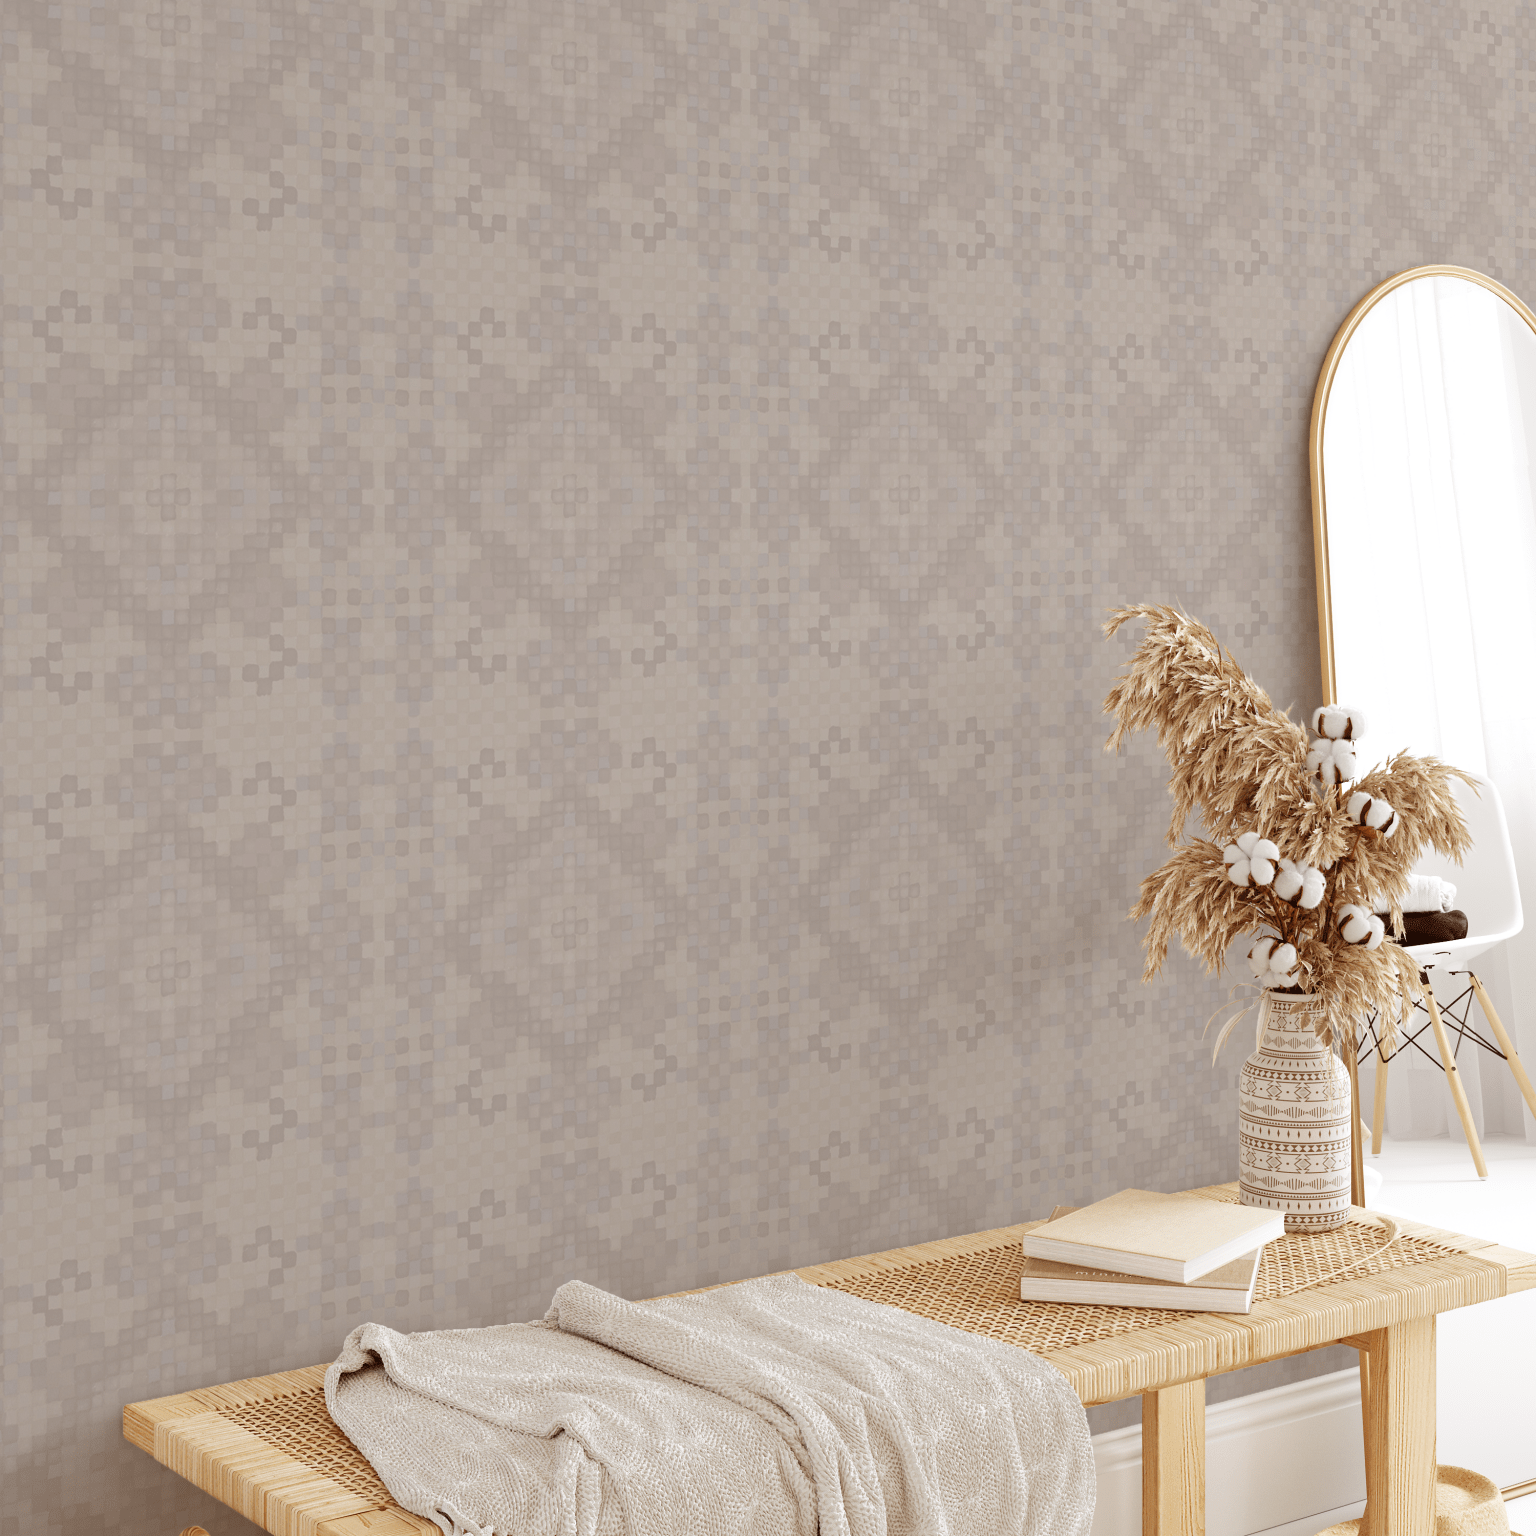 Moroccan tile design removable wallpaper for a bohemian style space 